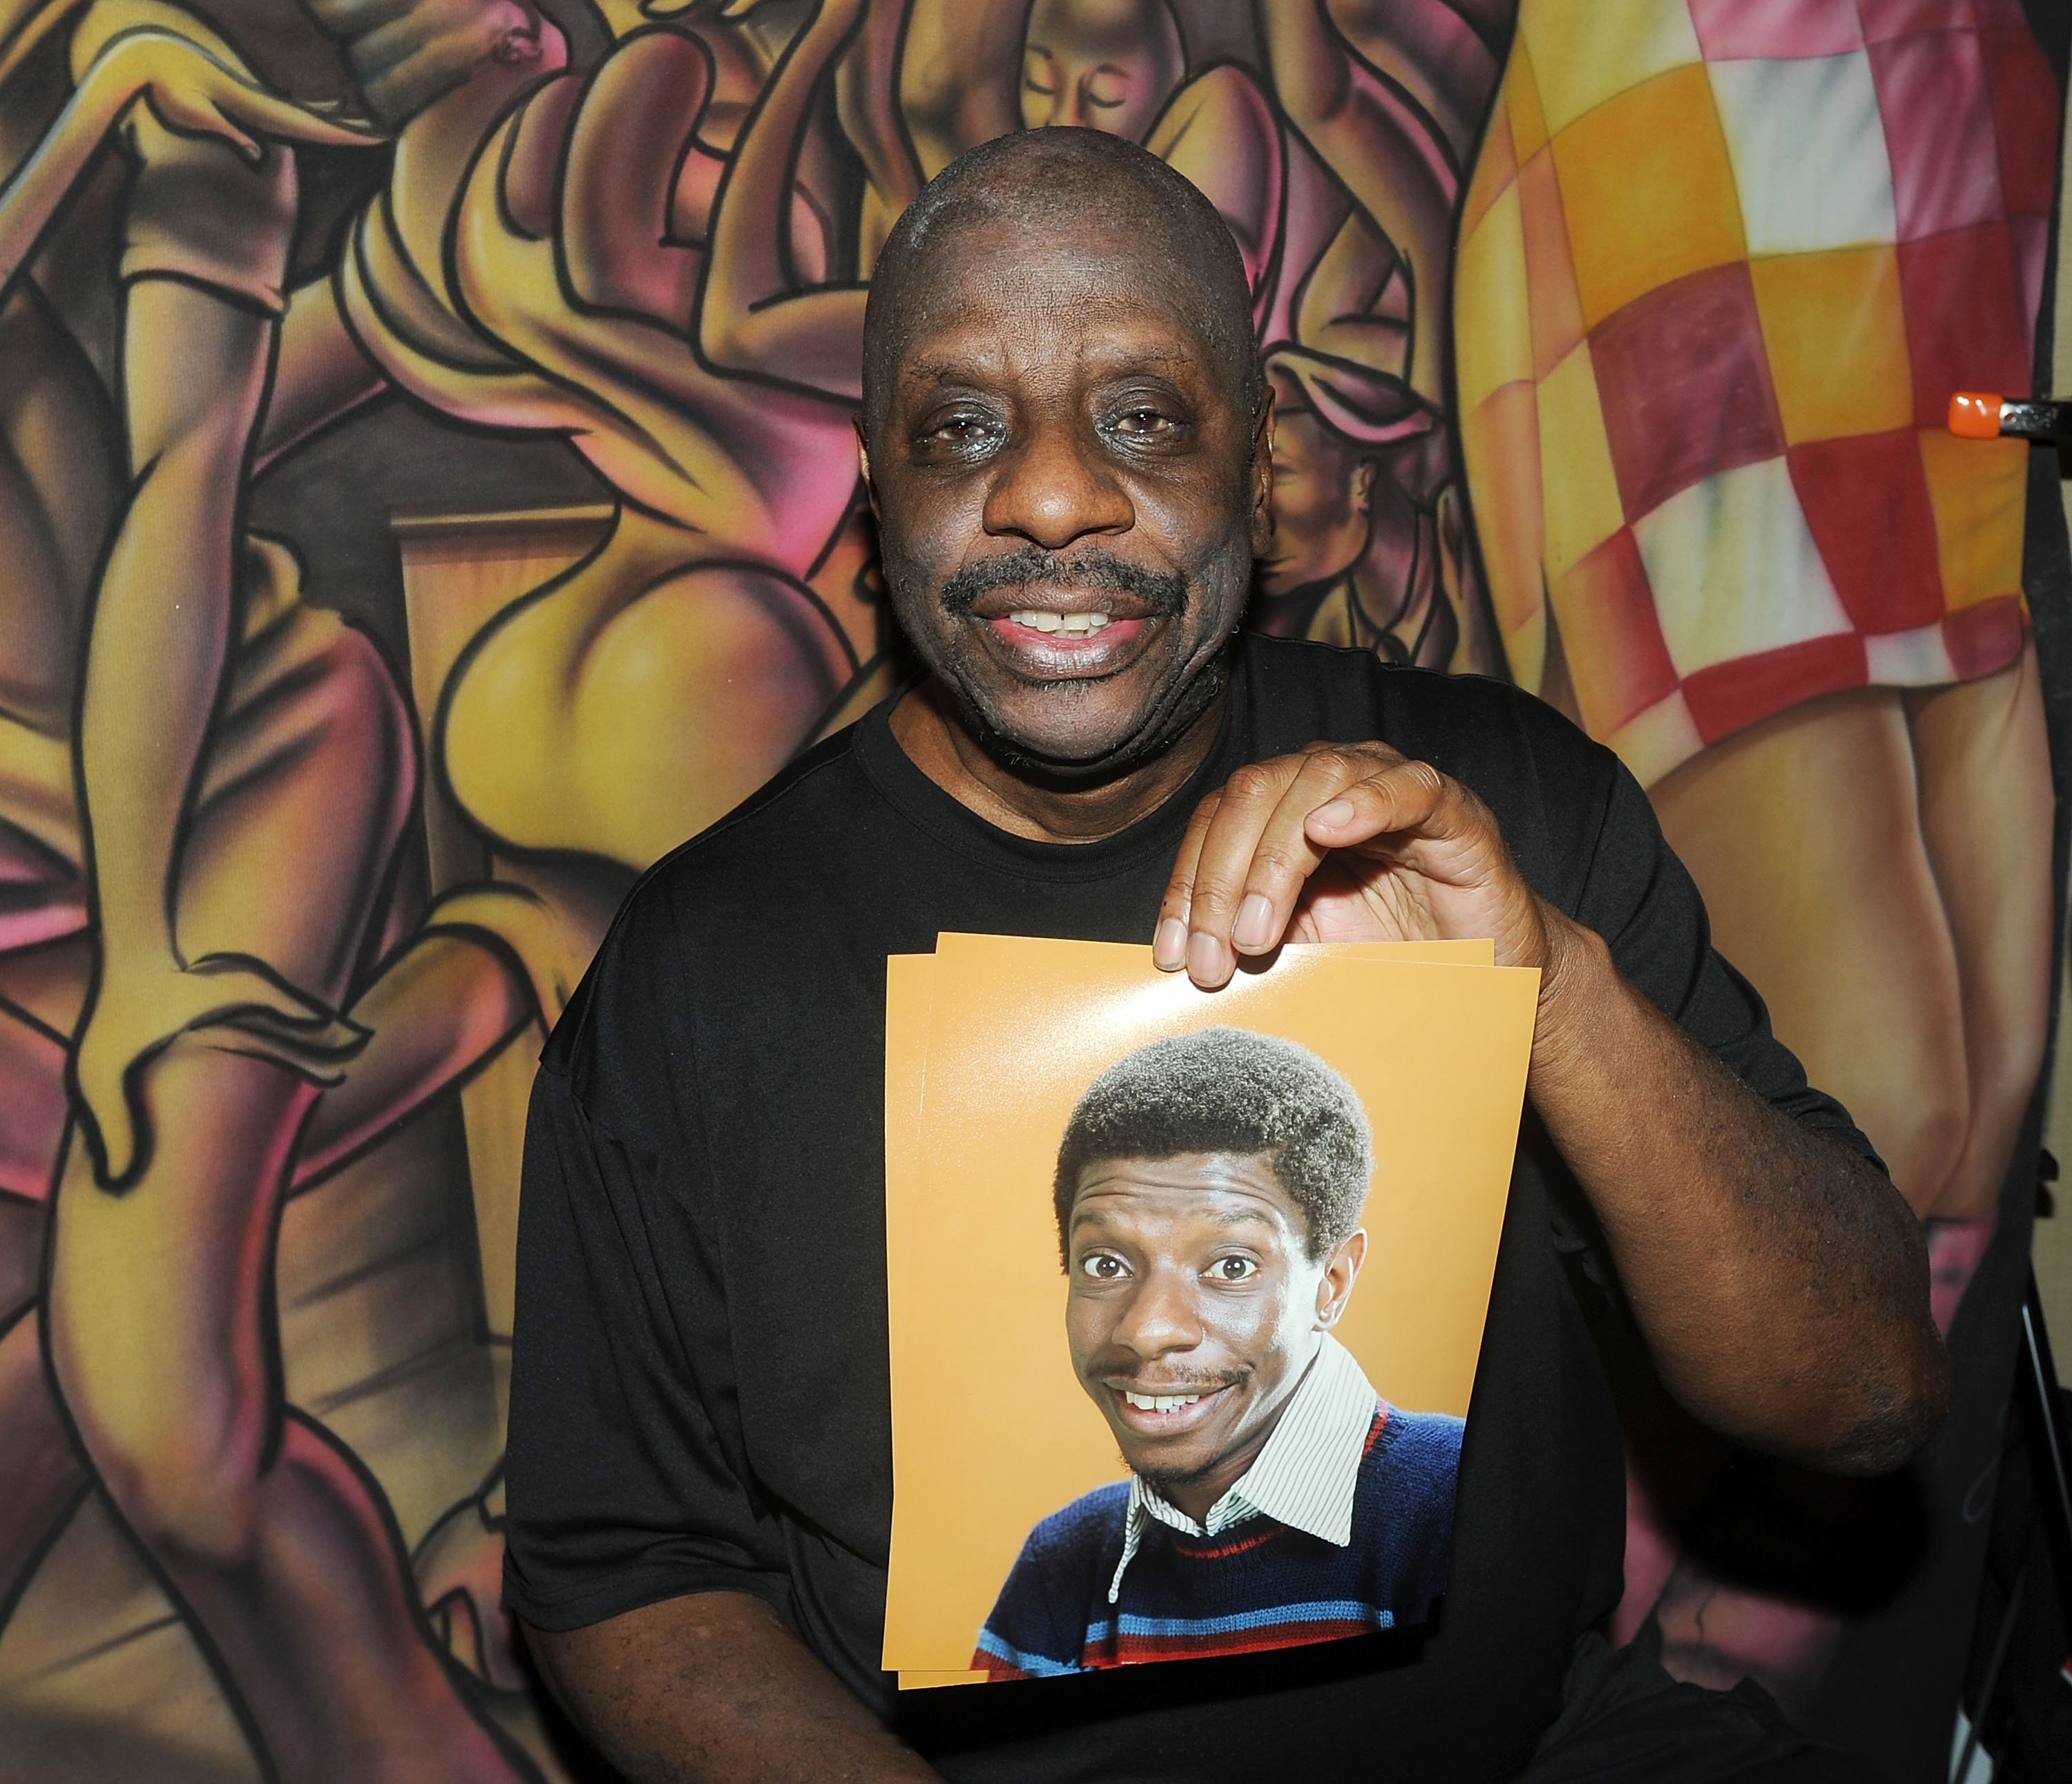 Jimmie JJ Walker attends Day 2 of the Chiller Theatre Expo at Sheraton Parsippany Hotel on October 25, 2014 | Photo: Getty Images